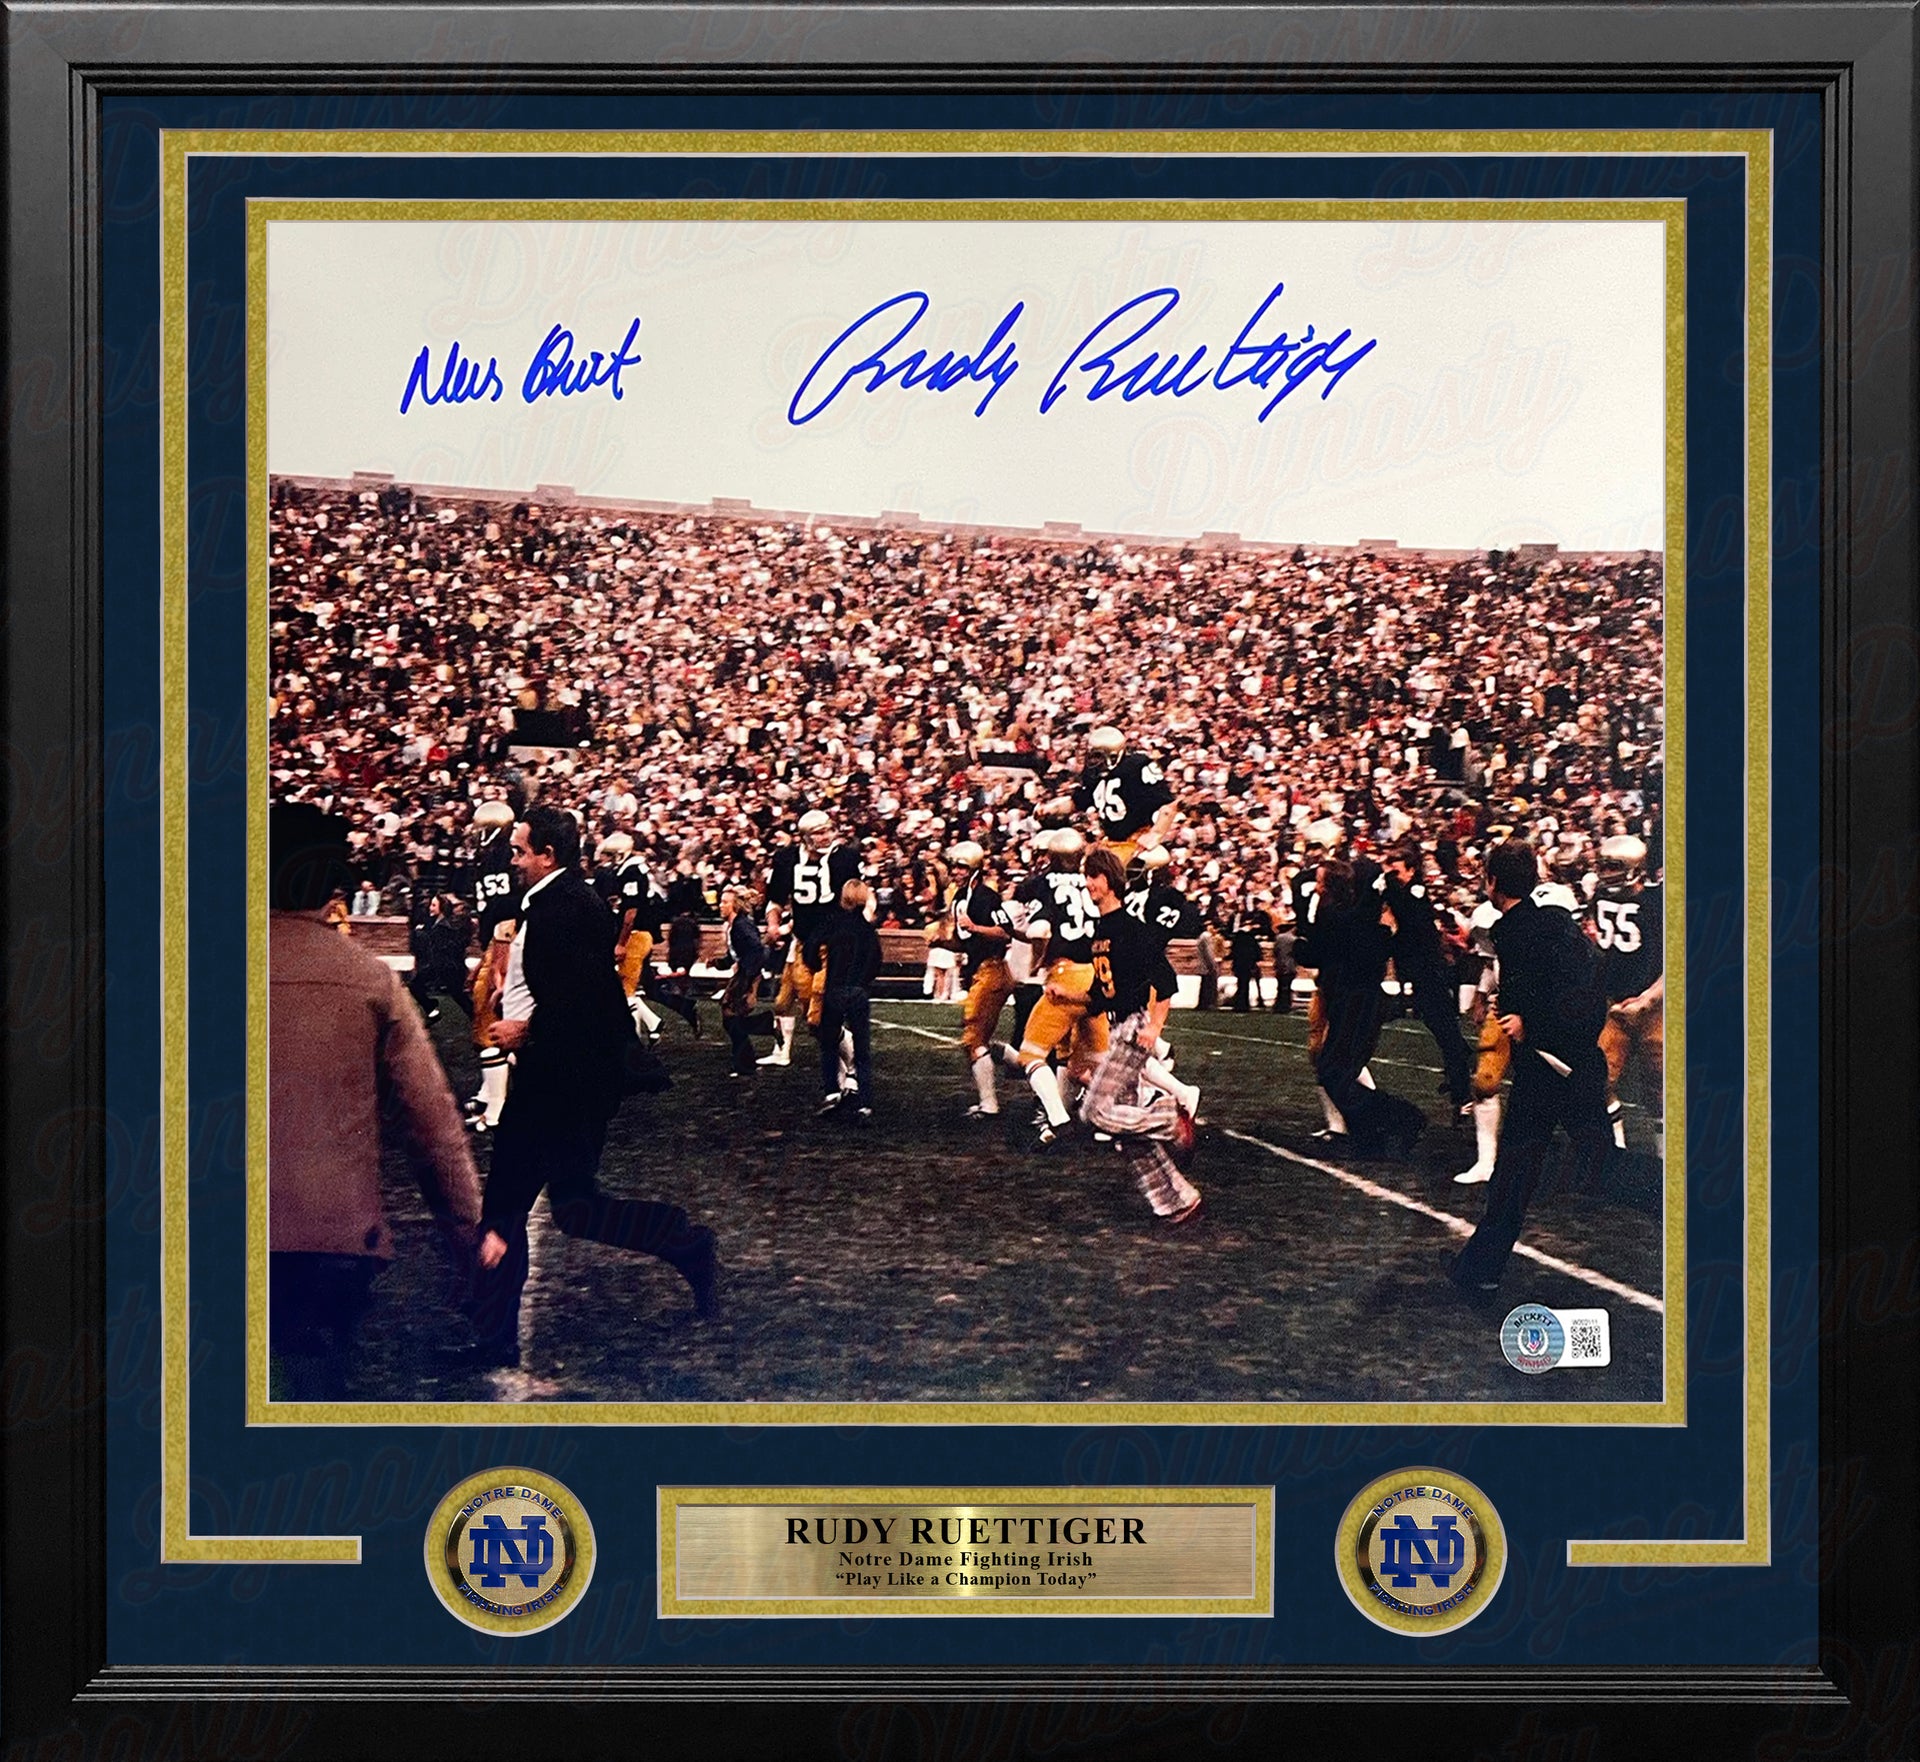 Rudy Ruettiger Notre Dame Fighting Irish Autographed 11" x 14" Framed College Football Photo - Dynasty Sports & Framing 